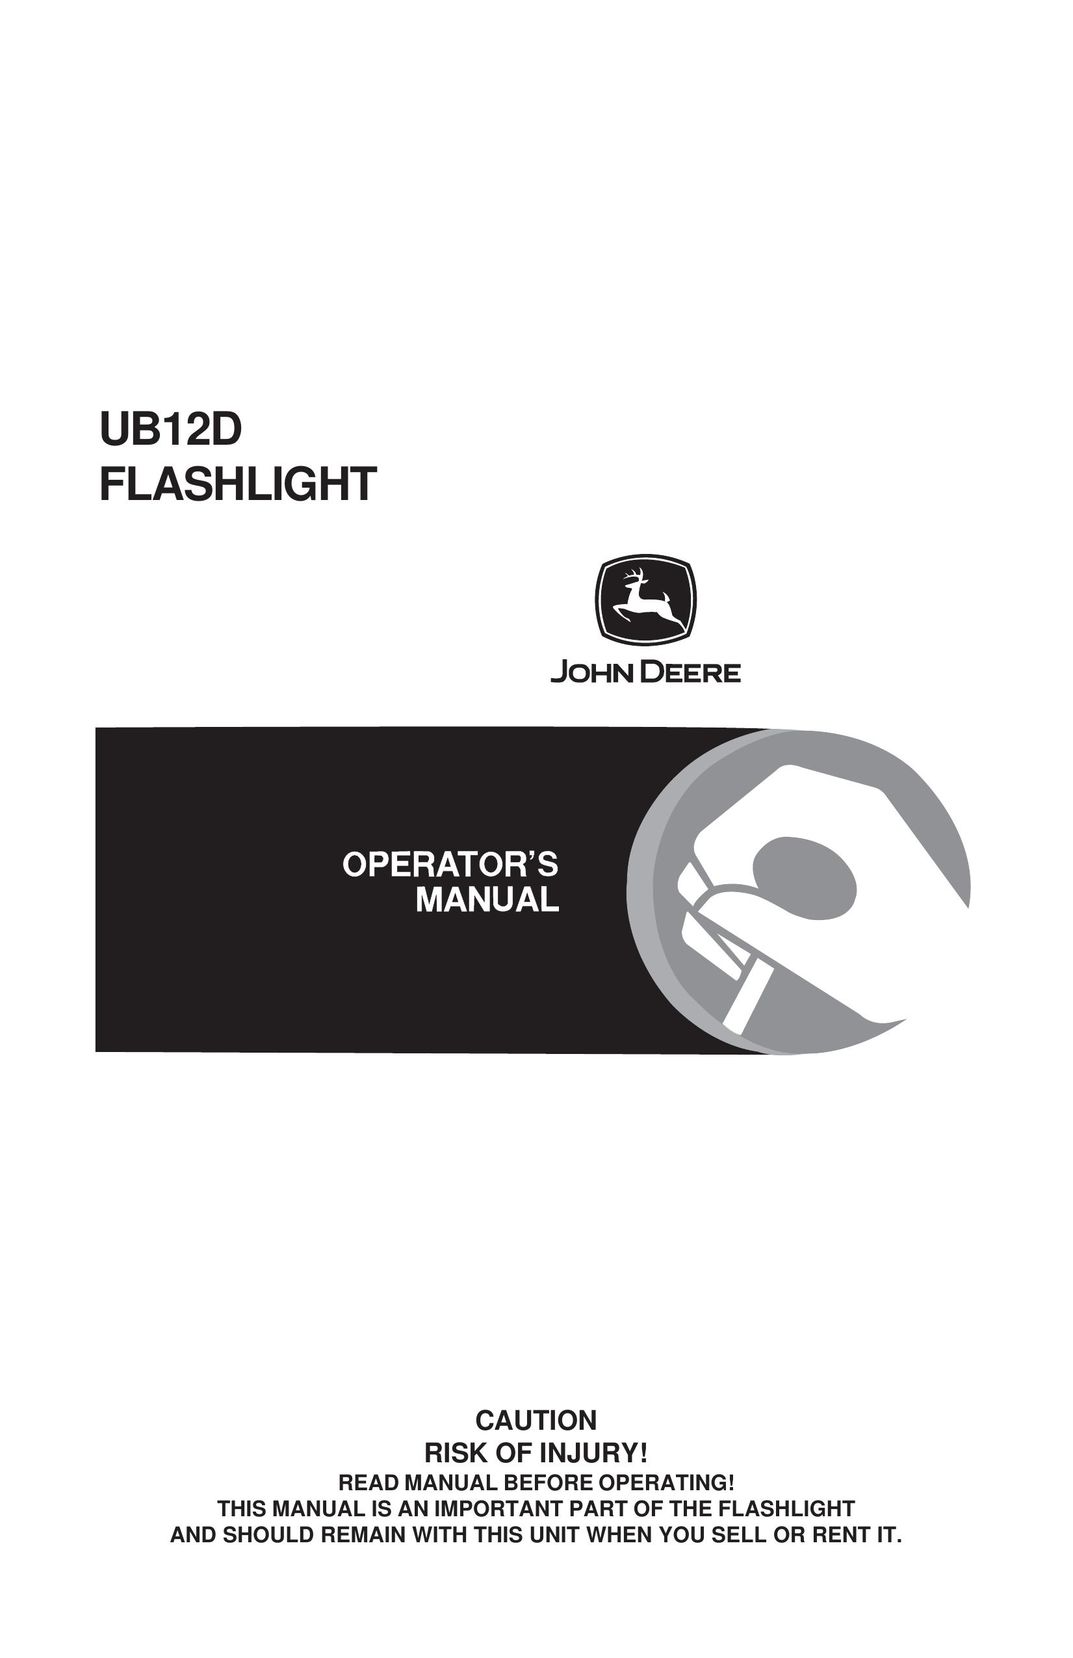 John Deere UB12D Home Safety Product User Manual